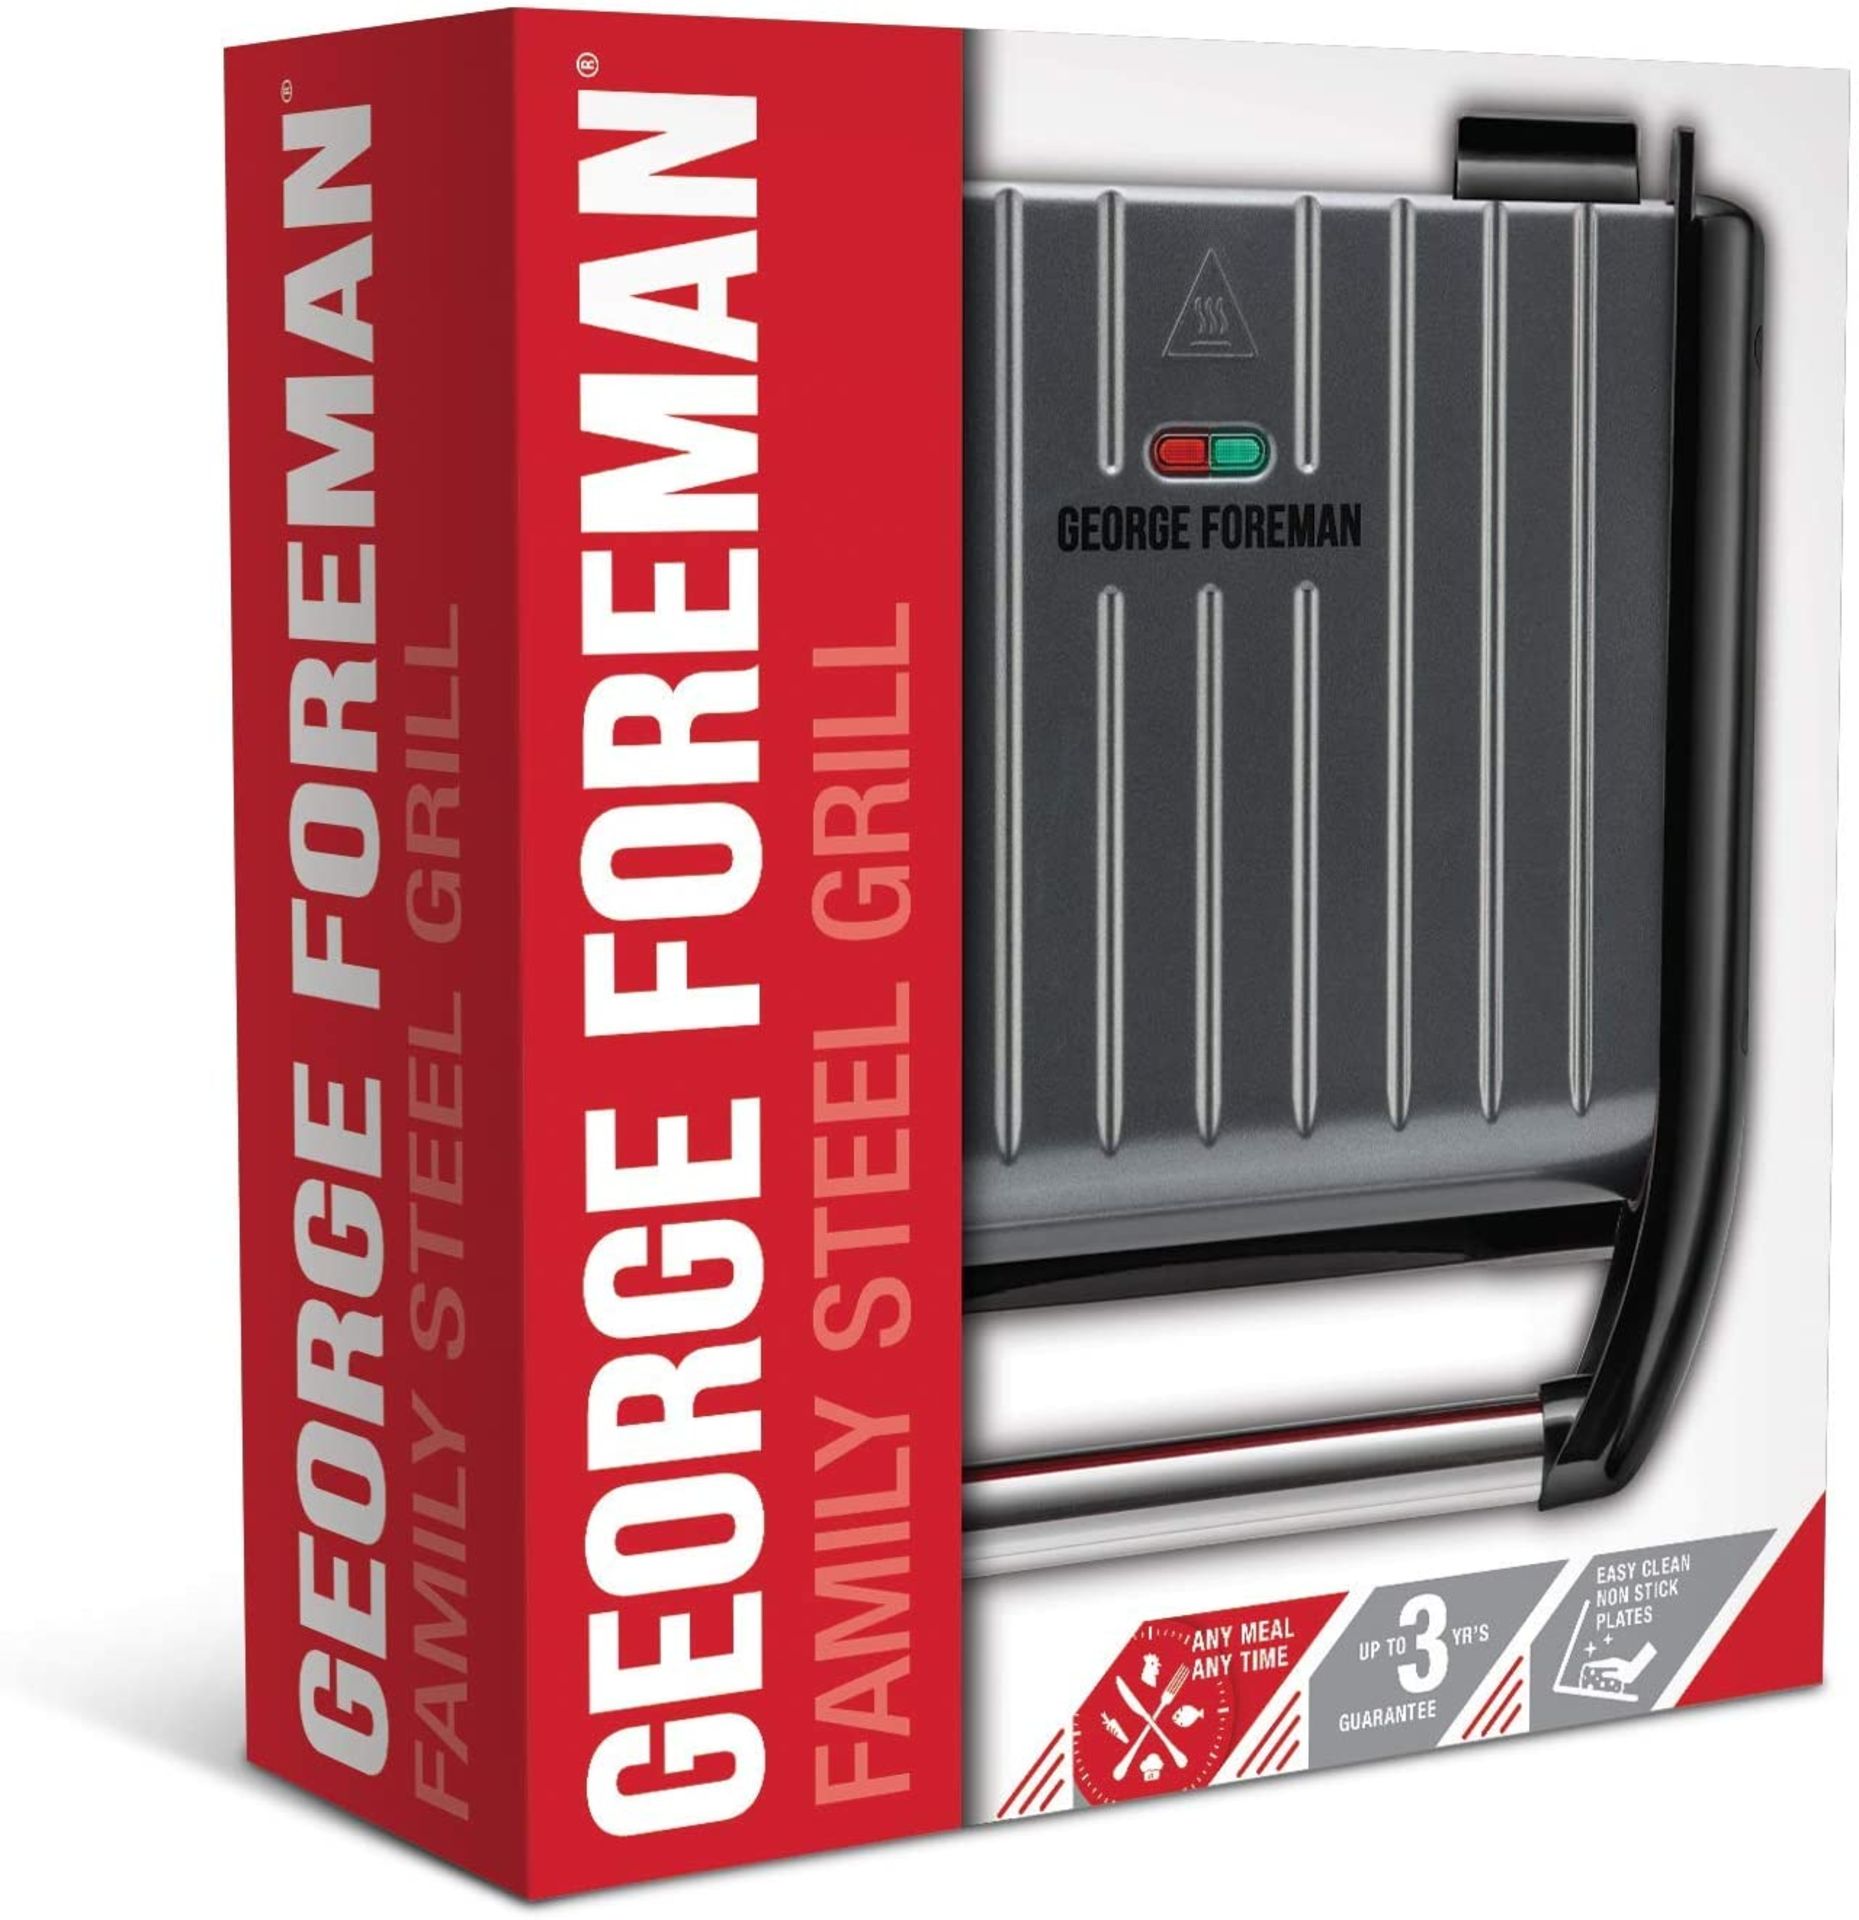 Grade A George Foreman Compact Steel Grill - RRP £32 - Image 3 of 3